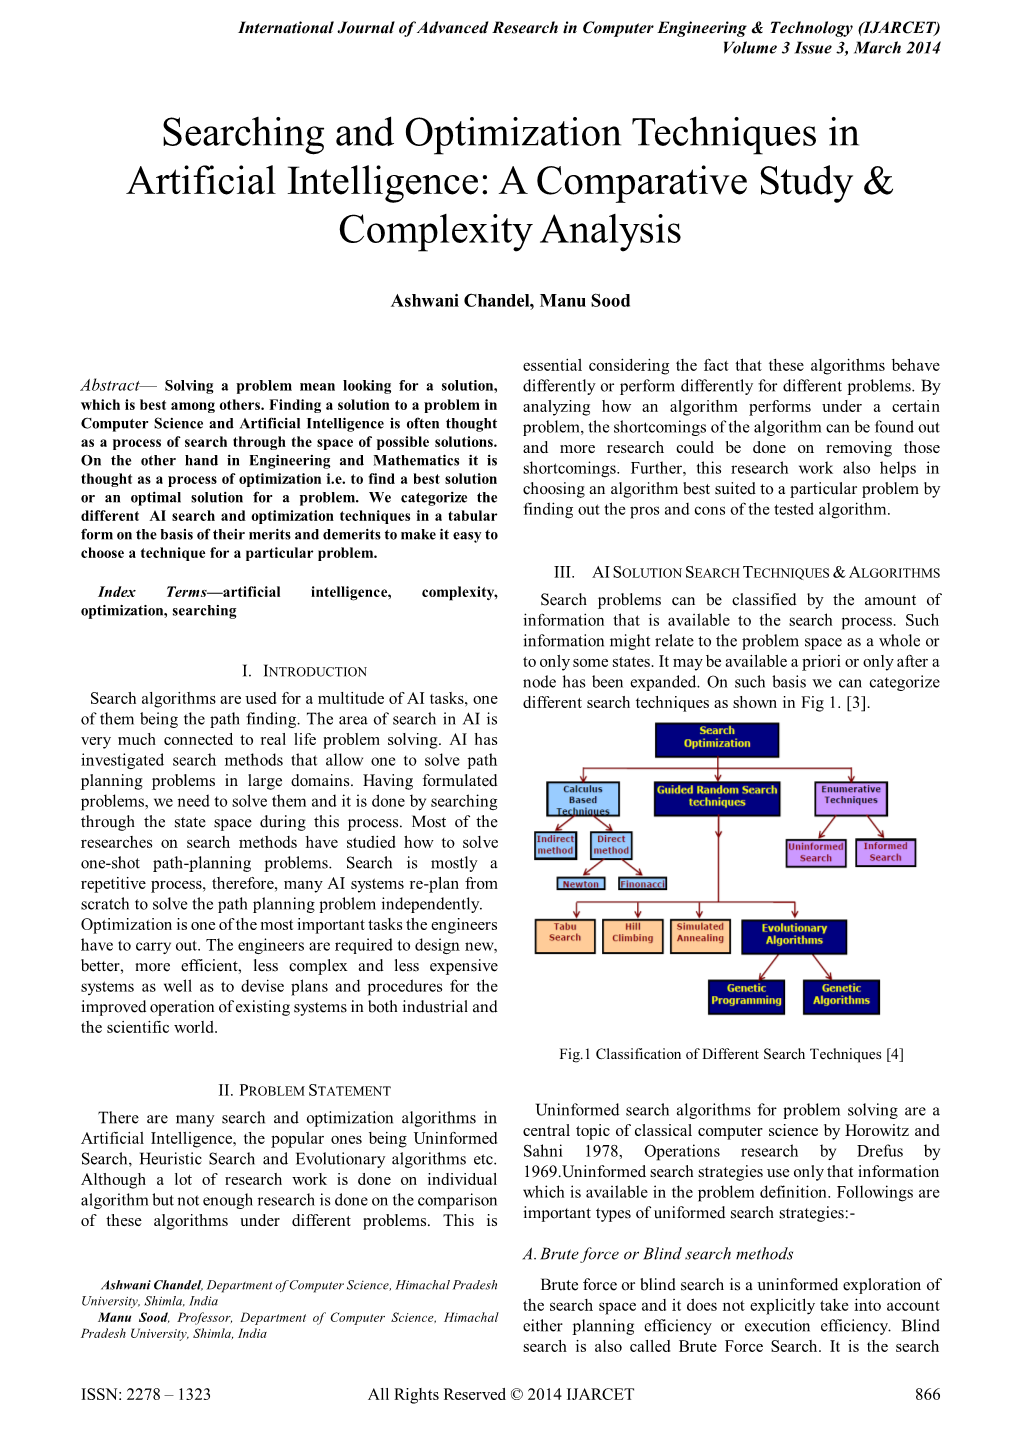 Searching and Optimization Techniques in Artificial Intelligence: a Comparative Study & Complexity Analysis